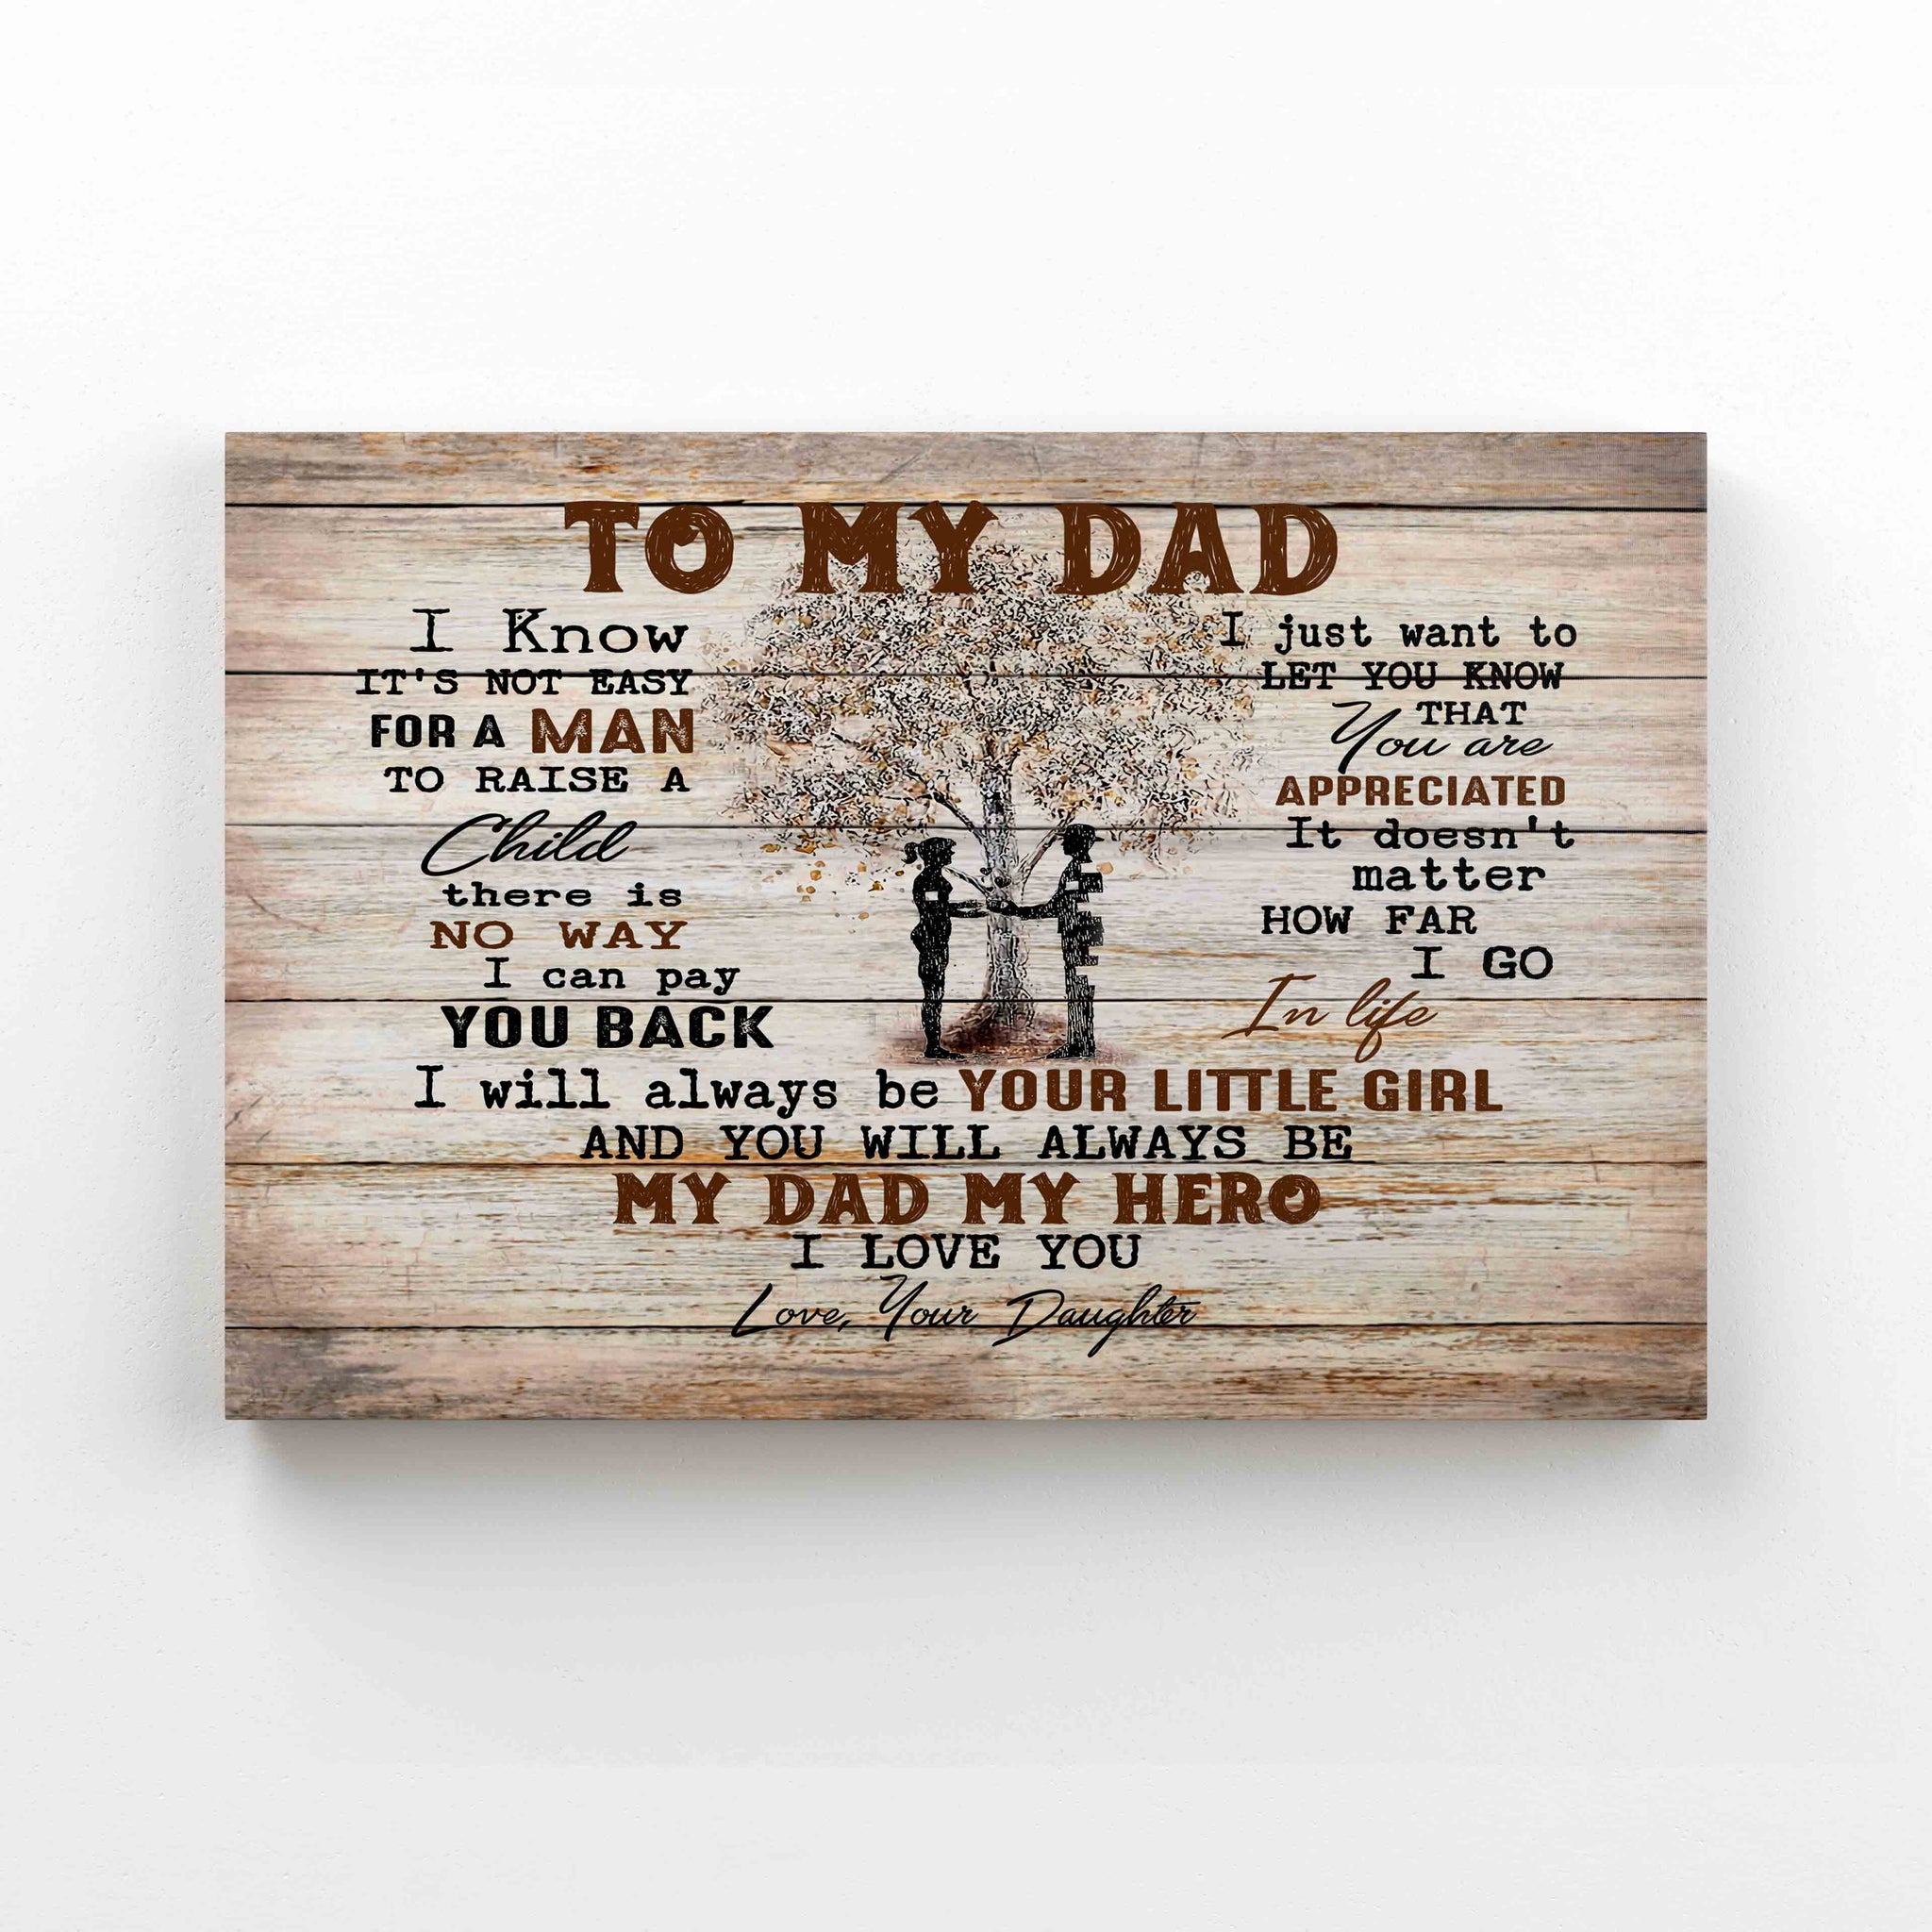 Personalized Name Canvas, To My Dad Canvas, Father Canvas, Family Canvas, Wall Art Canvas